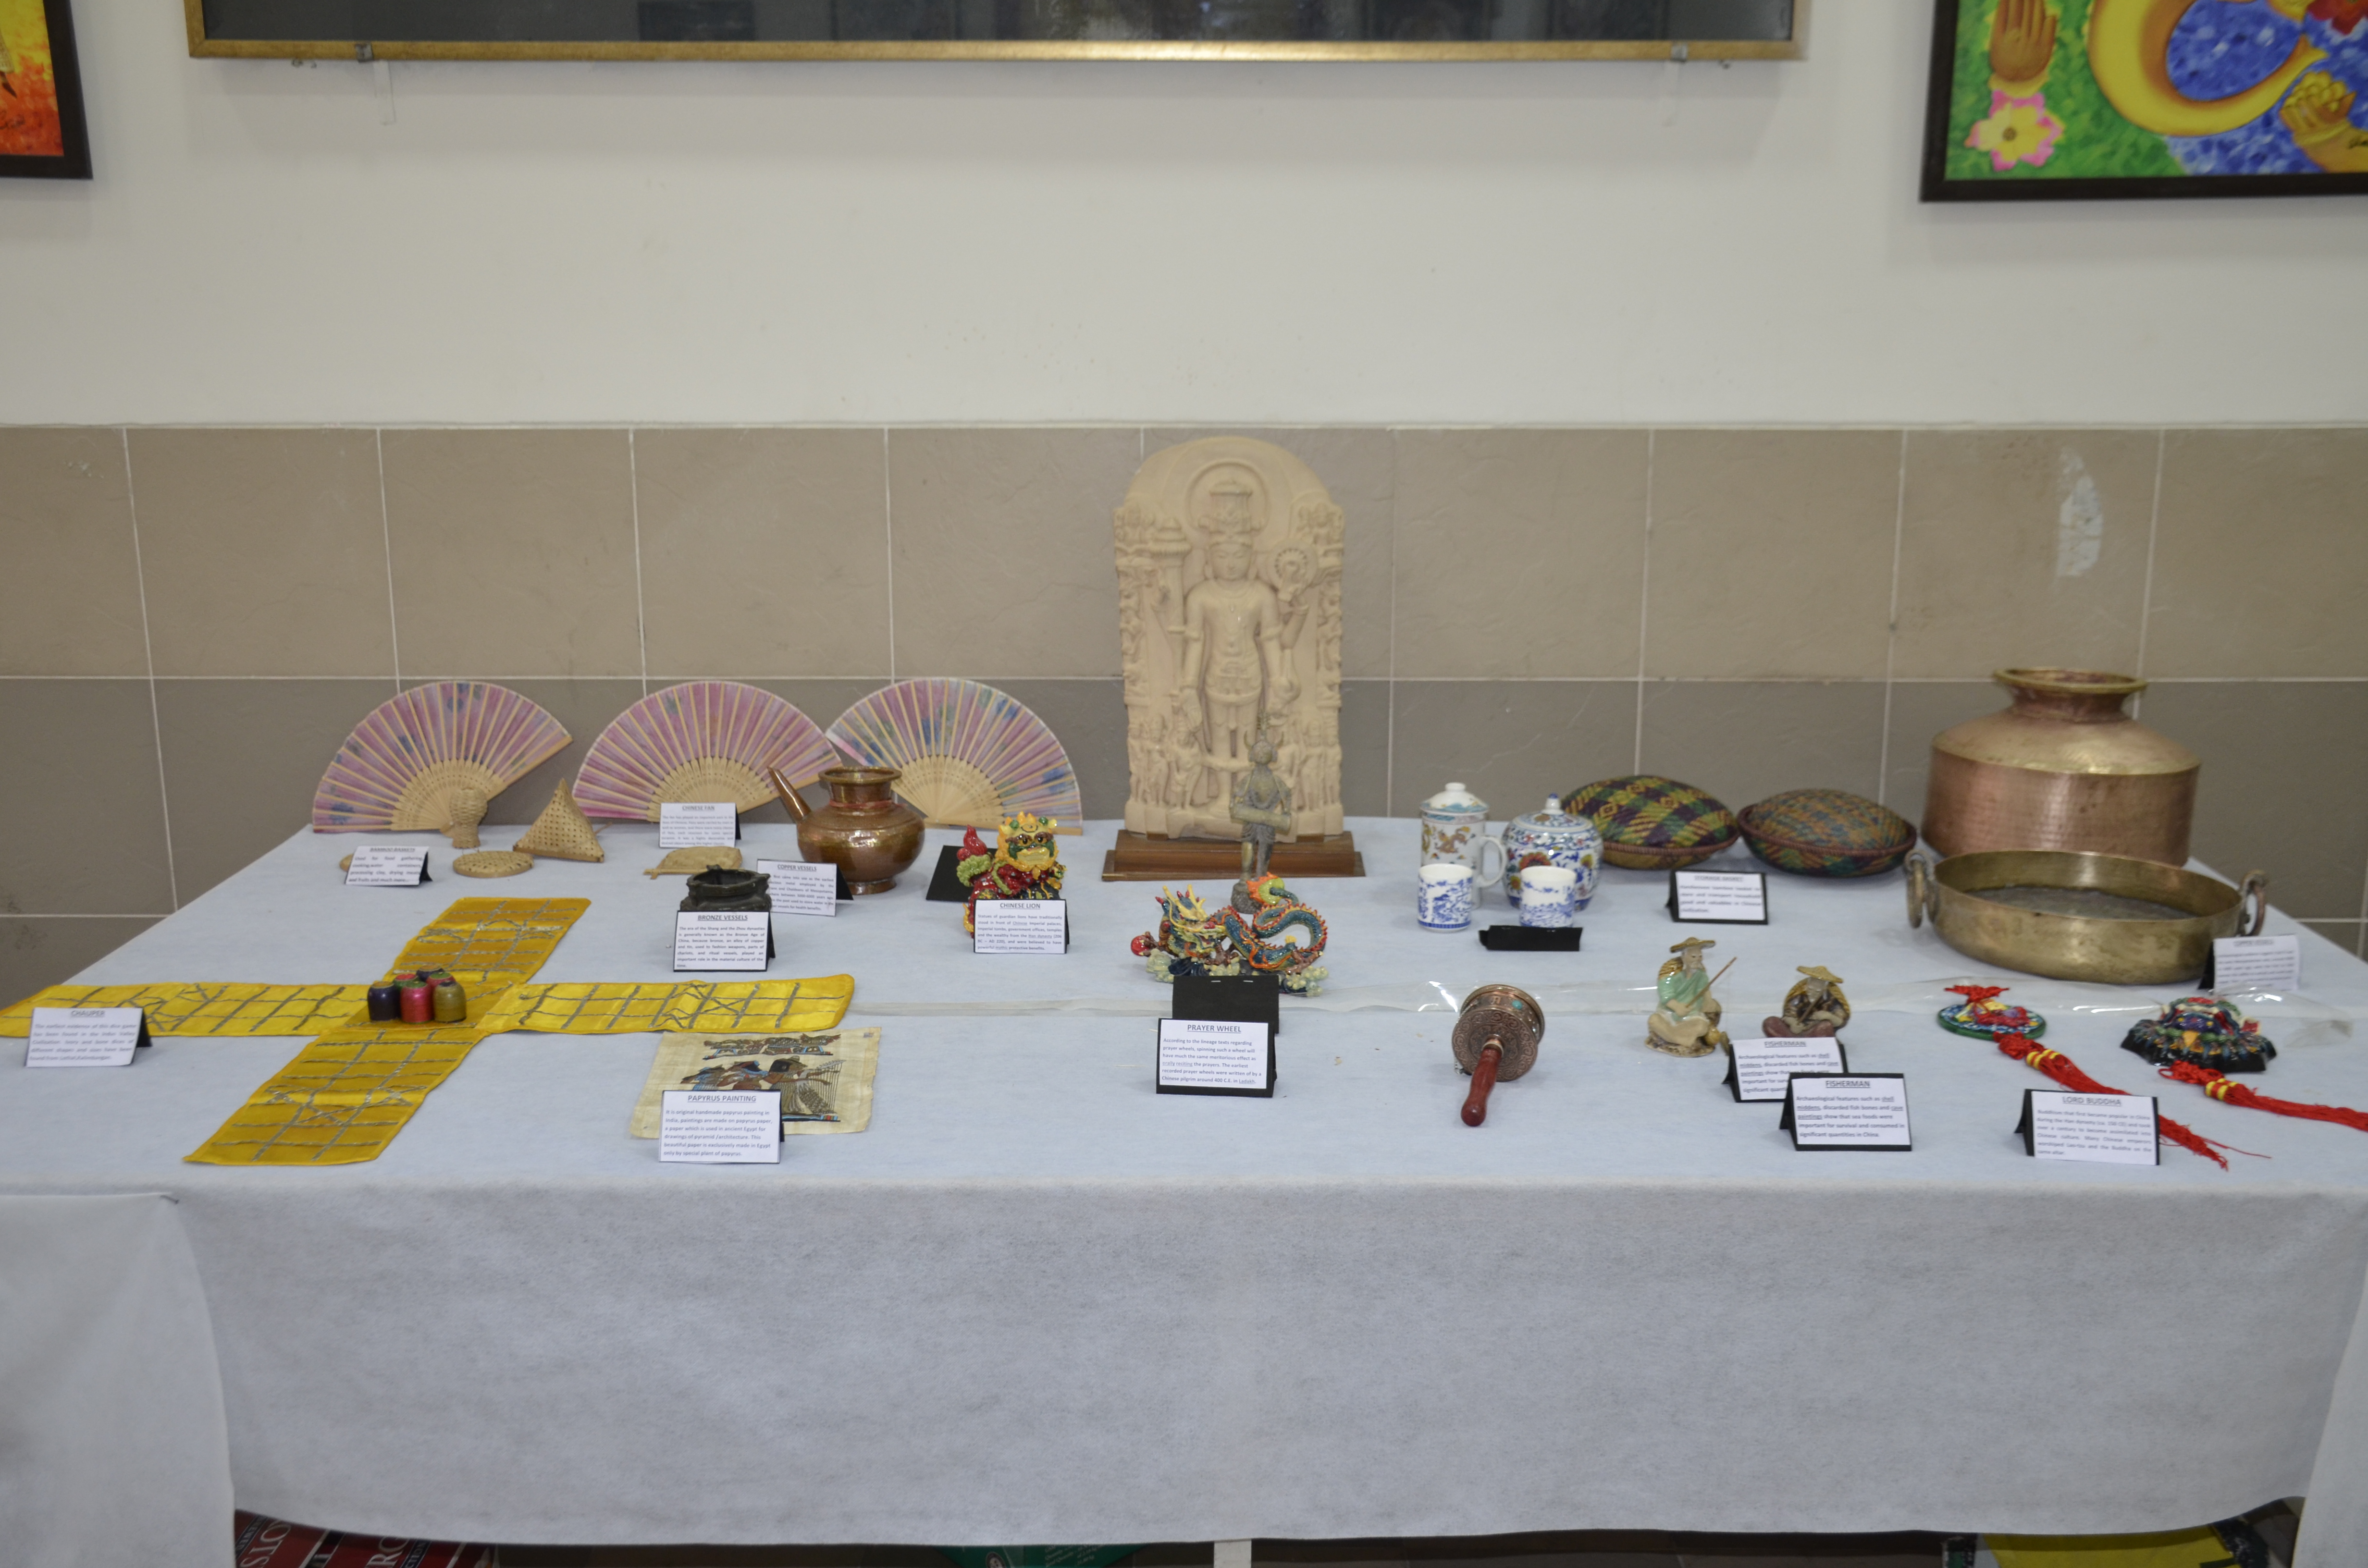 Artefacts and stories behind them